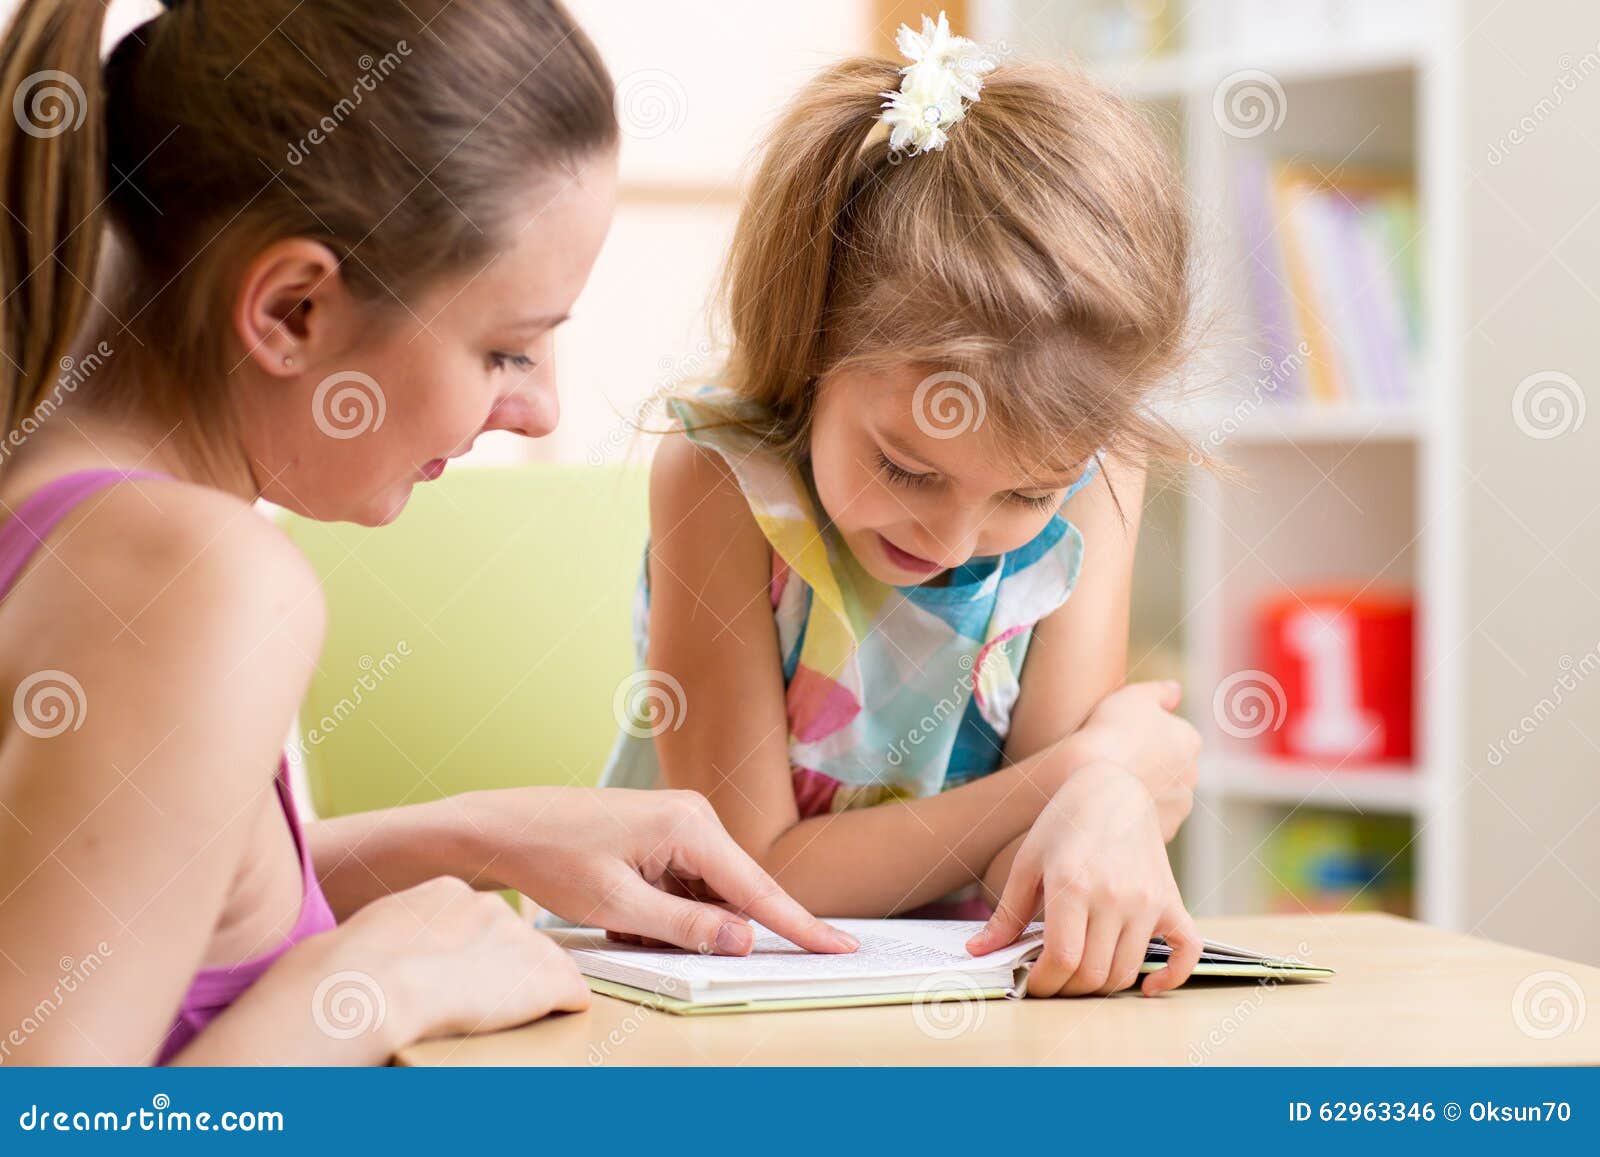 mother teaching child daughter to read